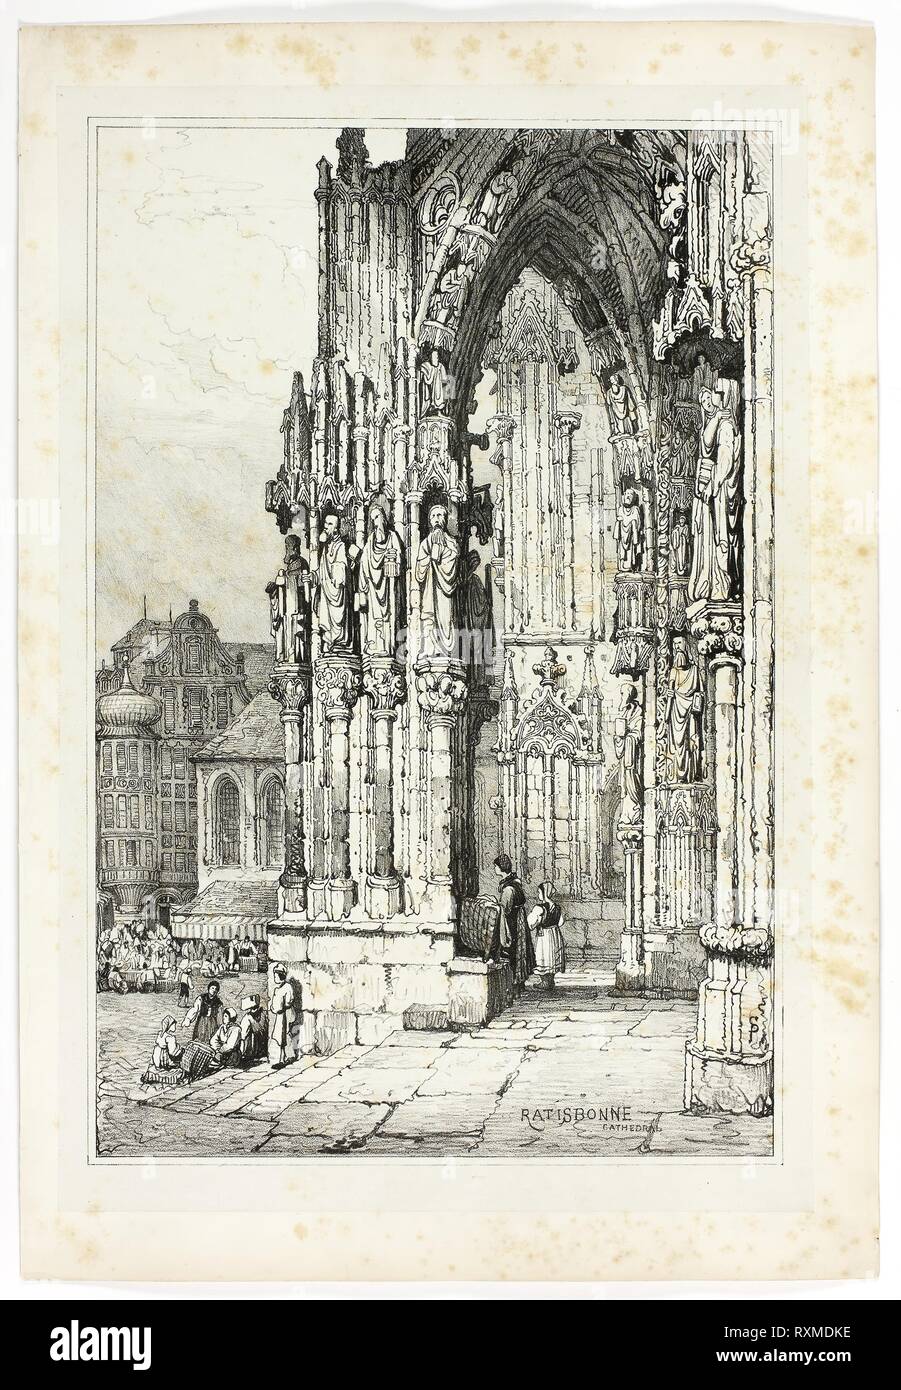 Ratisbonne Cathedral. Samuel Prout (English, 1783-1852); probably printed by Charles Joseph Hullmandel (English, 1789-1850); probably published by Rudolph Ackermann (English, 1764-1834). Date: 1833. Dimensions: 290 × 425 mm (image); 310 × 445 mm (primary support); 345 × 500 mm (secondary support). Lithograph in black on grayish-ivory chine, laid down on ivory wove paper. Origin: England. Museum: The Chicago Art Institute. Stock Photo